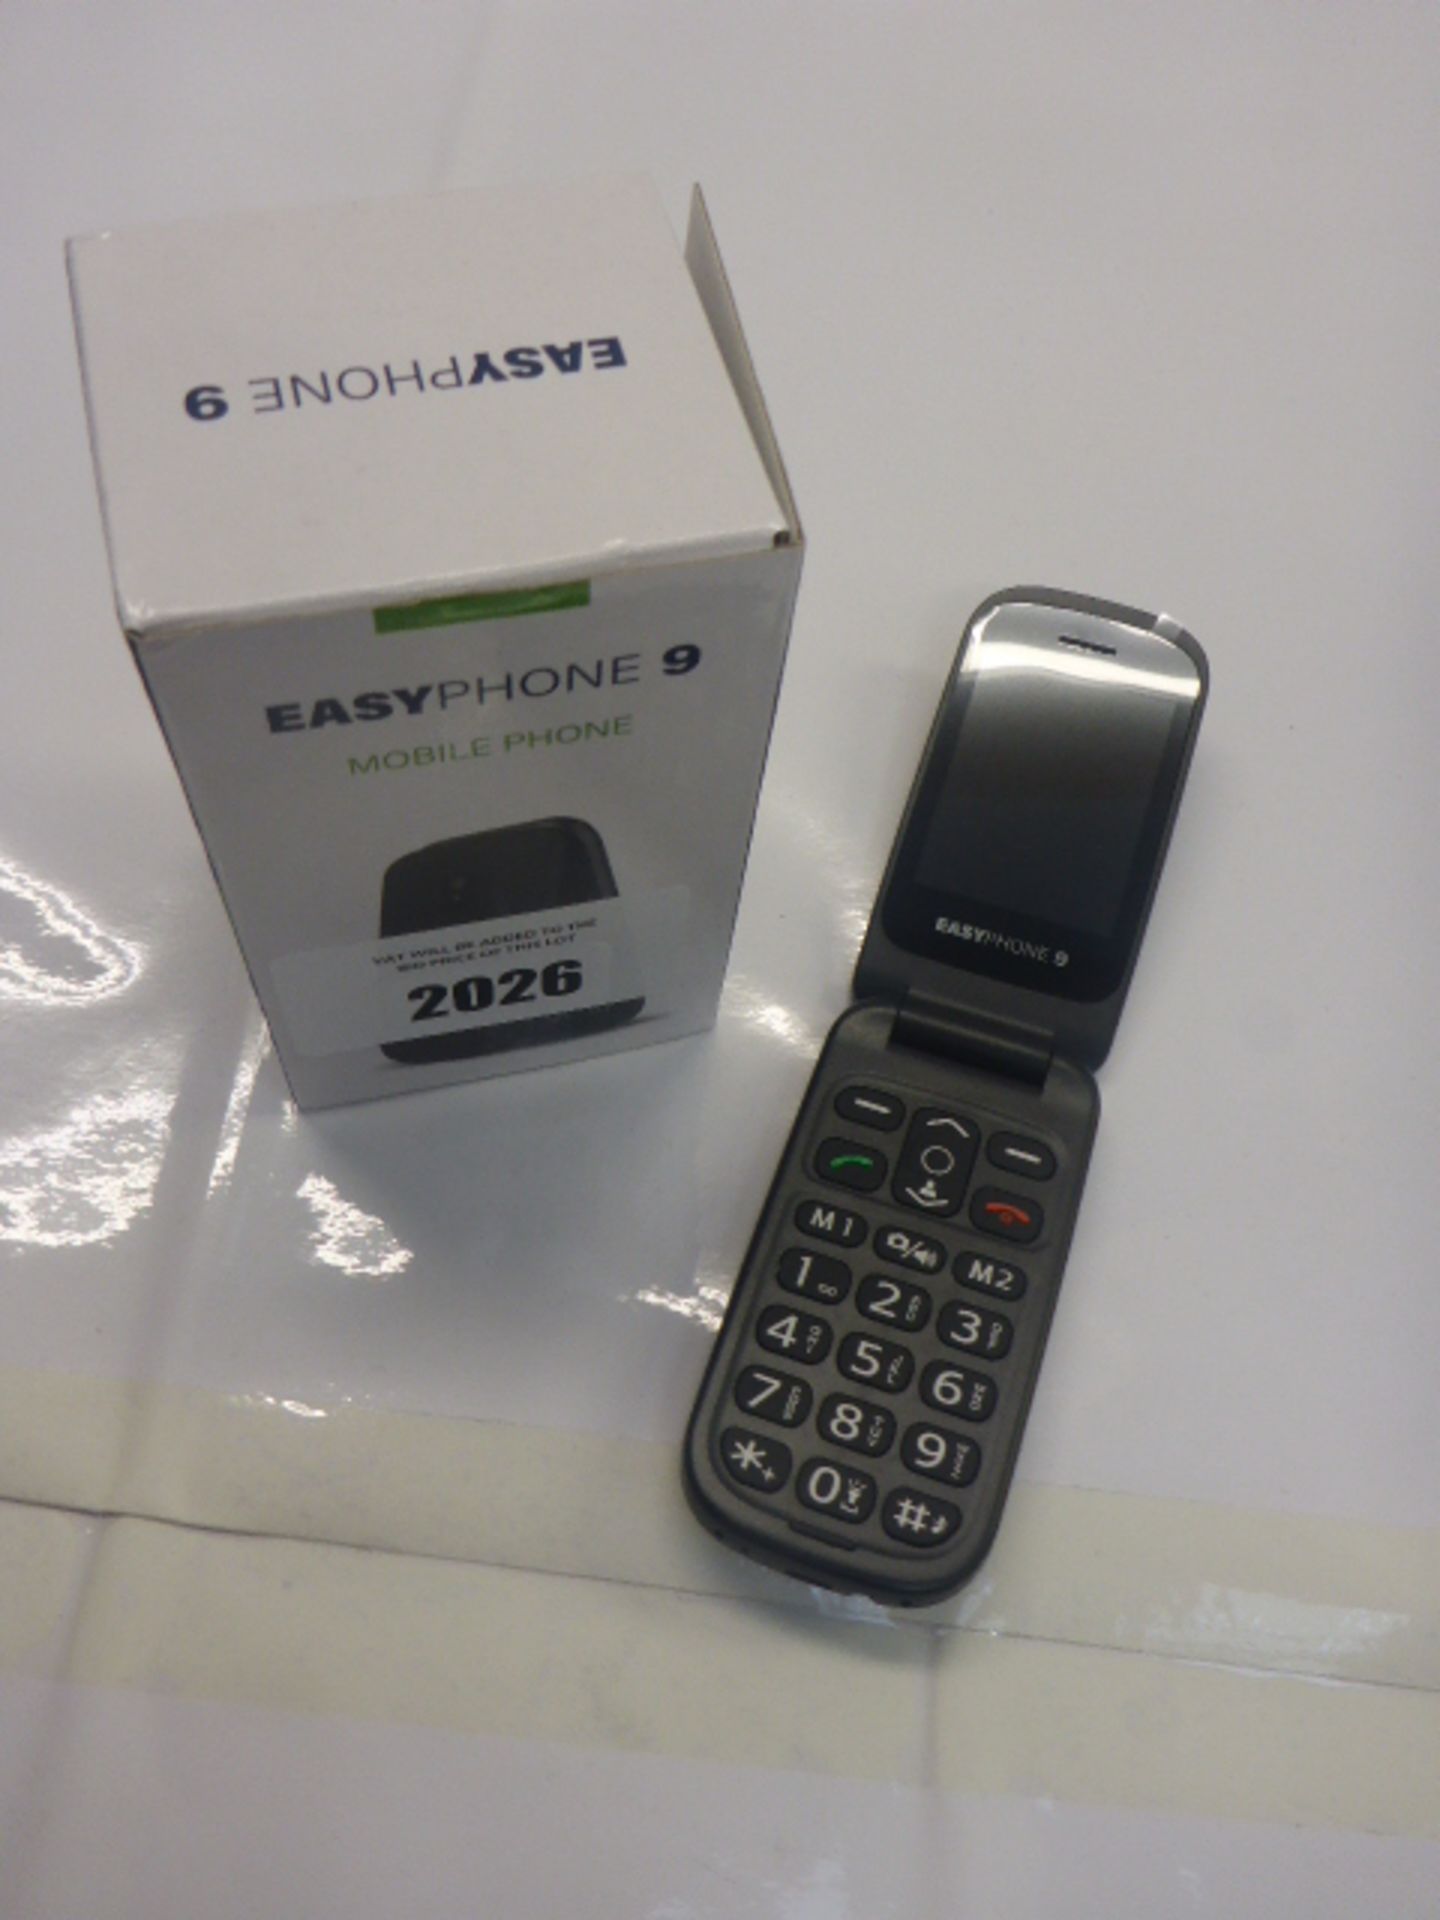 Easy phone 9 Flip Mobile with box.